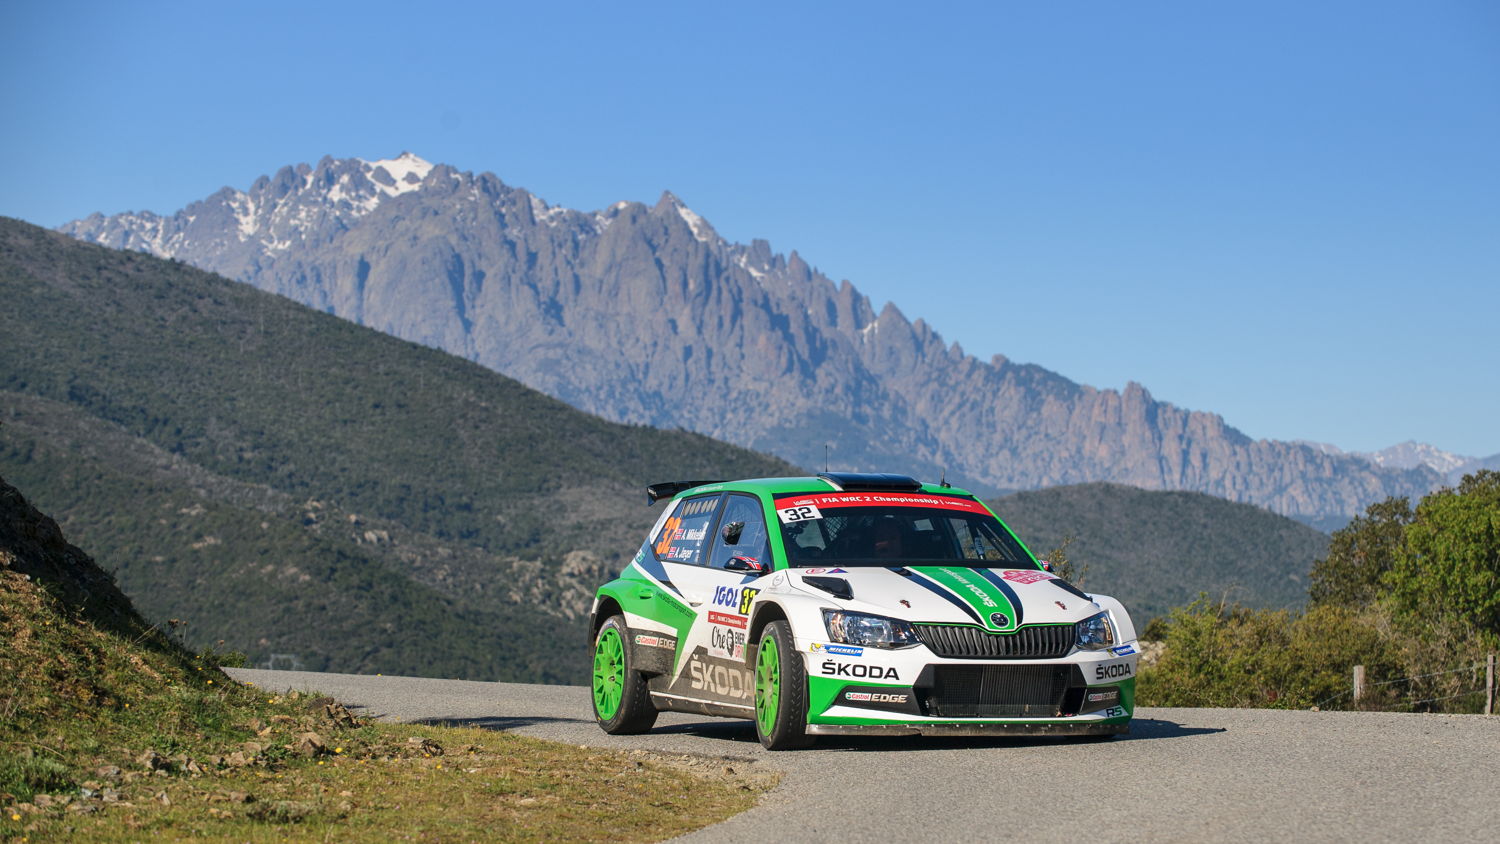 A place in the sun – ŠKODA works team Andreas Mikkelsen/Anders Jæger-Synnevaag (NOR/NOR) further extended their lead in the WRC 2 category at the Tour de Corse.